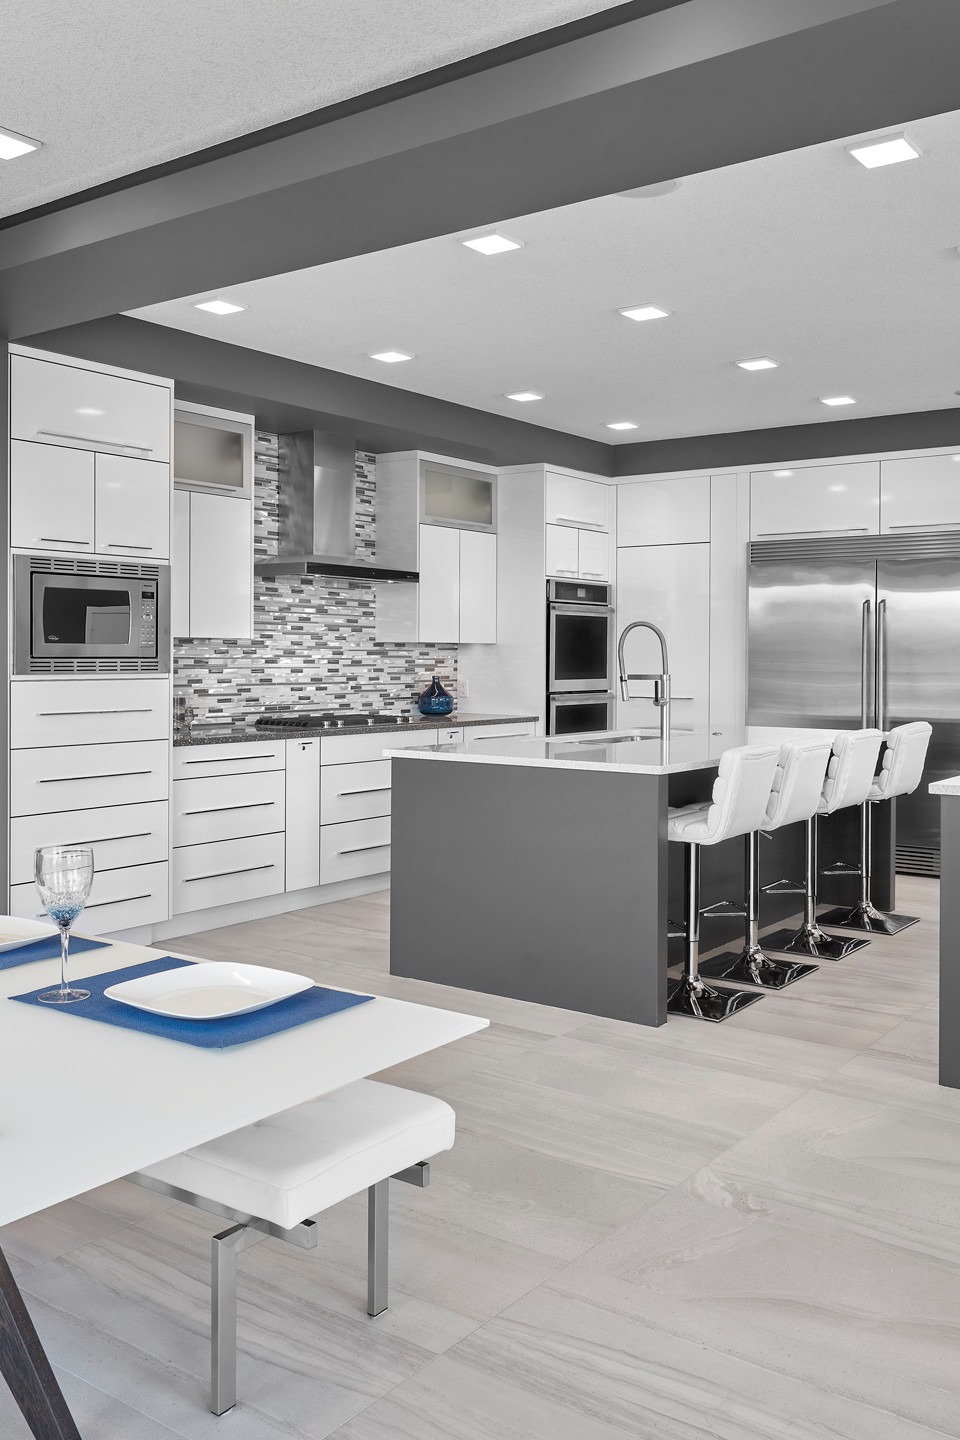 Kitchen Cabinetry Simple Hardware Contemporary Kitchen Cabinets Contemporary Design Sleek